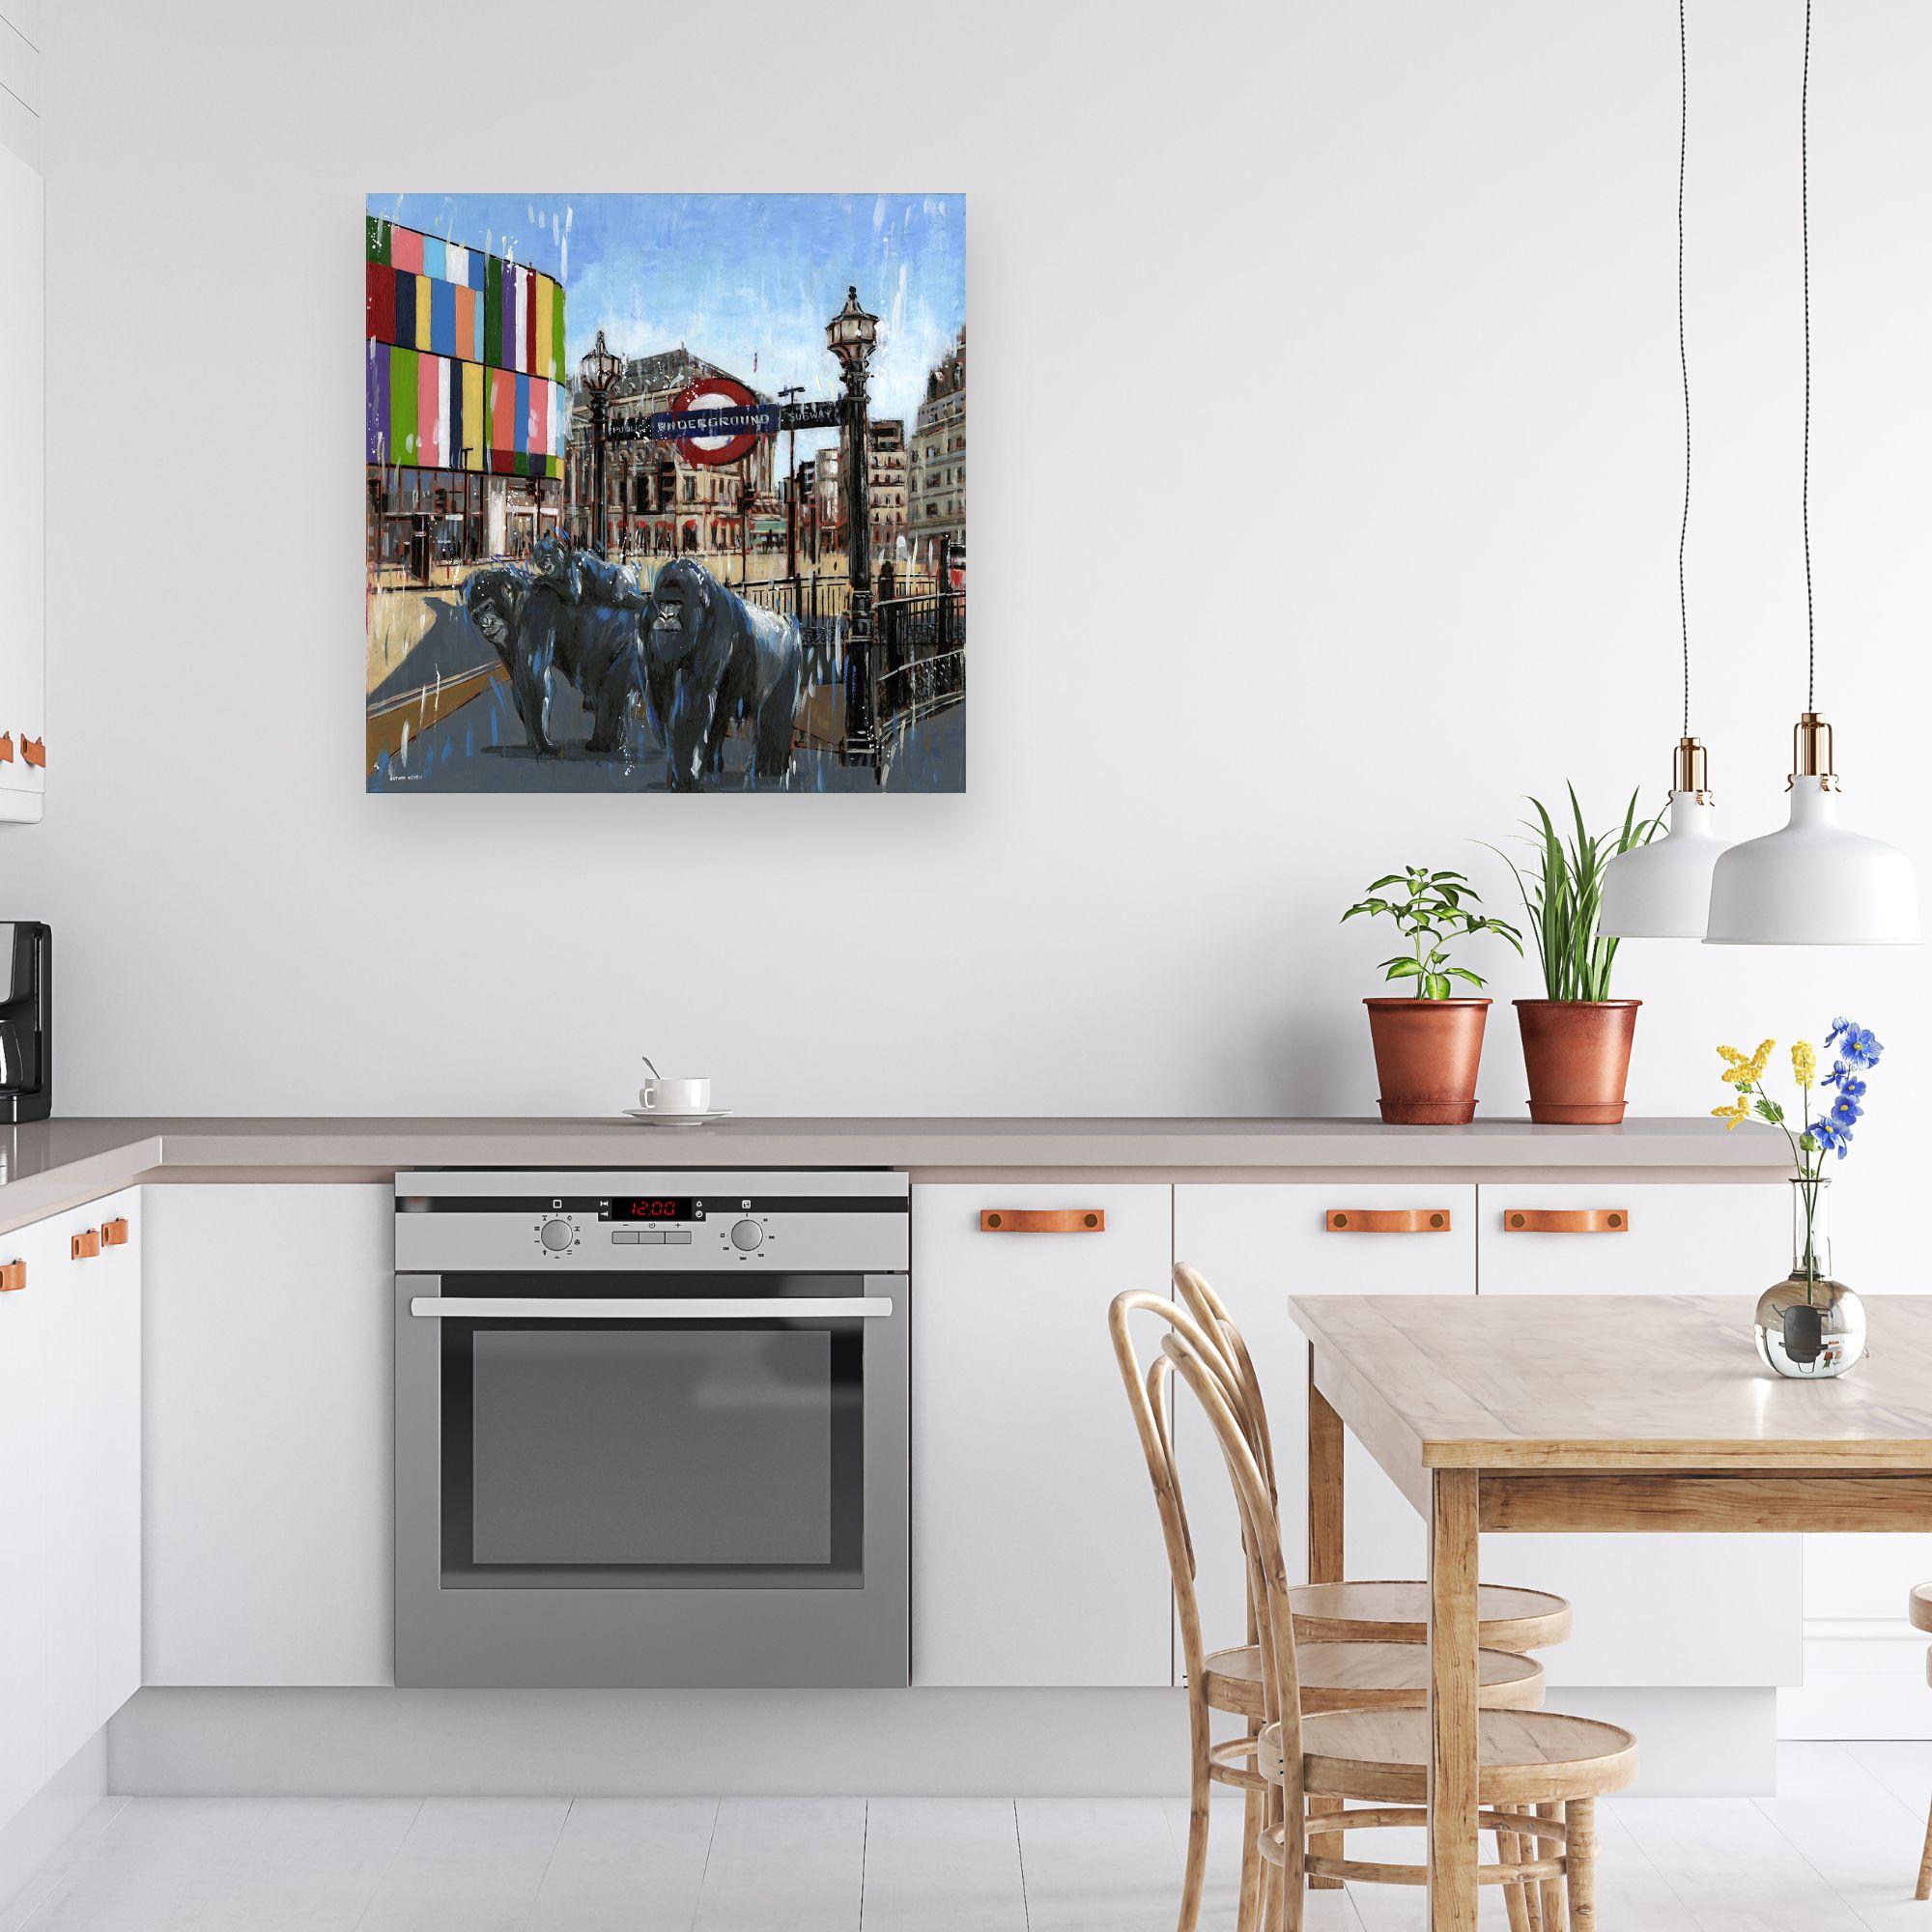 Family Day Off - London modern cityscape wildlife surreal abstract oil painting  For Sale 1